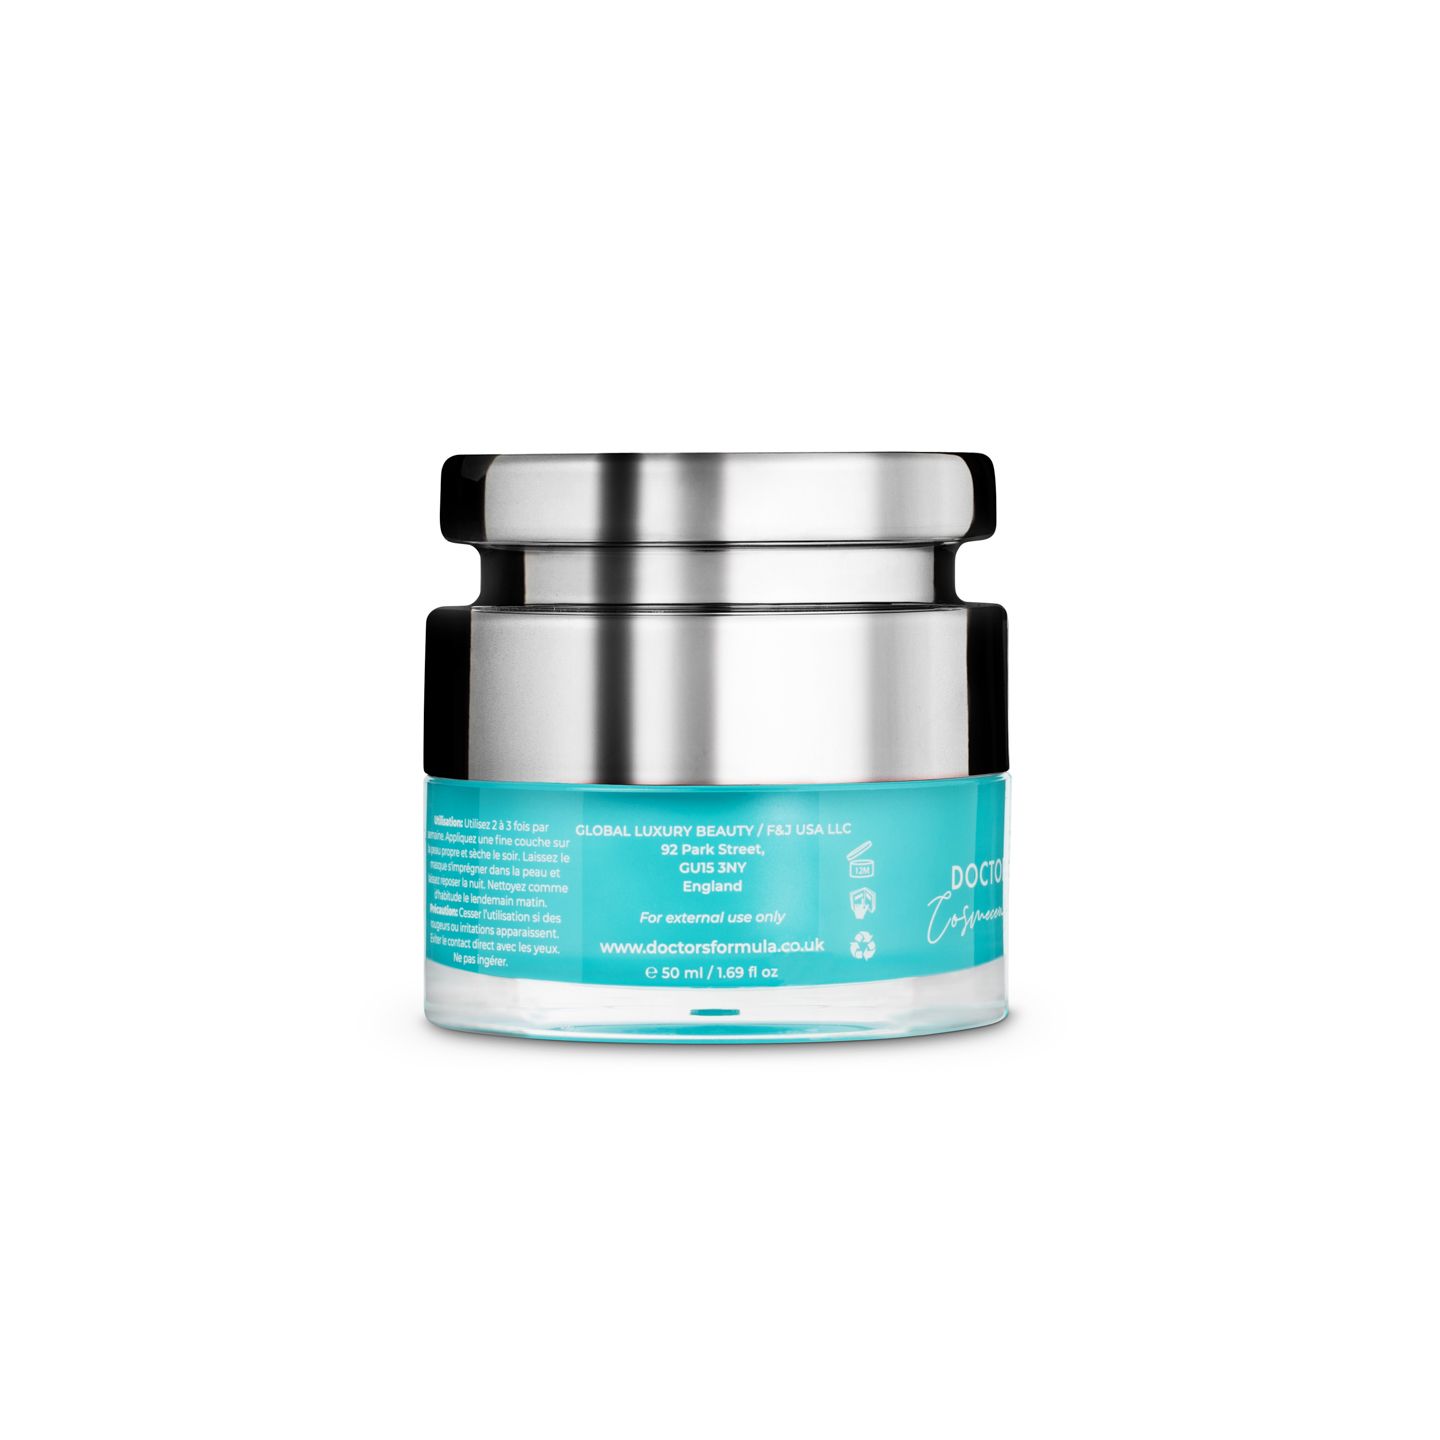 Our 8 Hour Deep Repair Mask is overnight miracle mask for dry, tired looking skin. 
It contains complex of collagen ingredients that nourish, hydrate and smoothen the skin for a radiant  and youthful complexion.

Key Ingredients:
- The soluble collagen balances, nourishes and moisturises the skin.
- The Active Mineral Complex improves the moisture levels of skin.

Usage:
Apply a thin layer onto the skin after cleansing,avoiding the delicate eye area. Leave for 5-10 minutes and wash off. For best results, use 2-3 times per week.

100% Cruelty Free